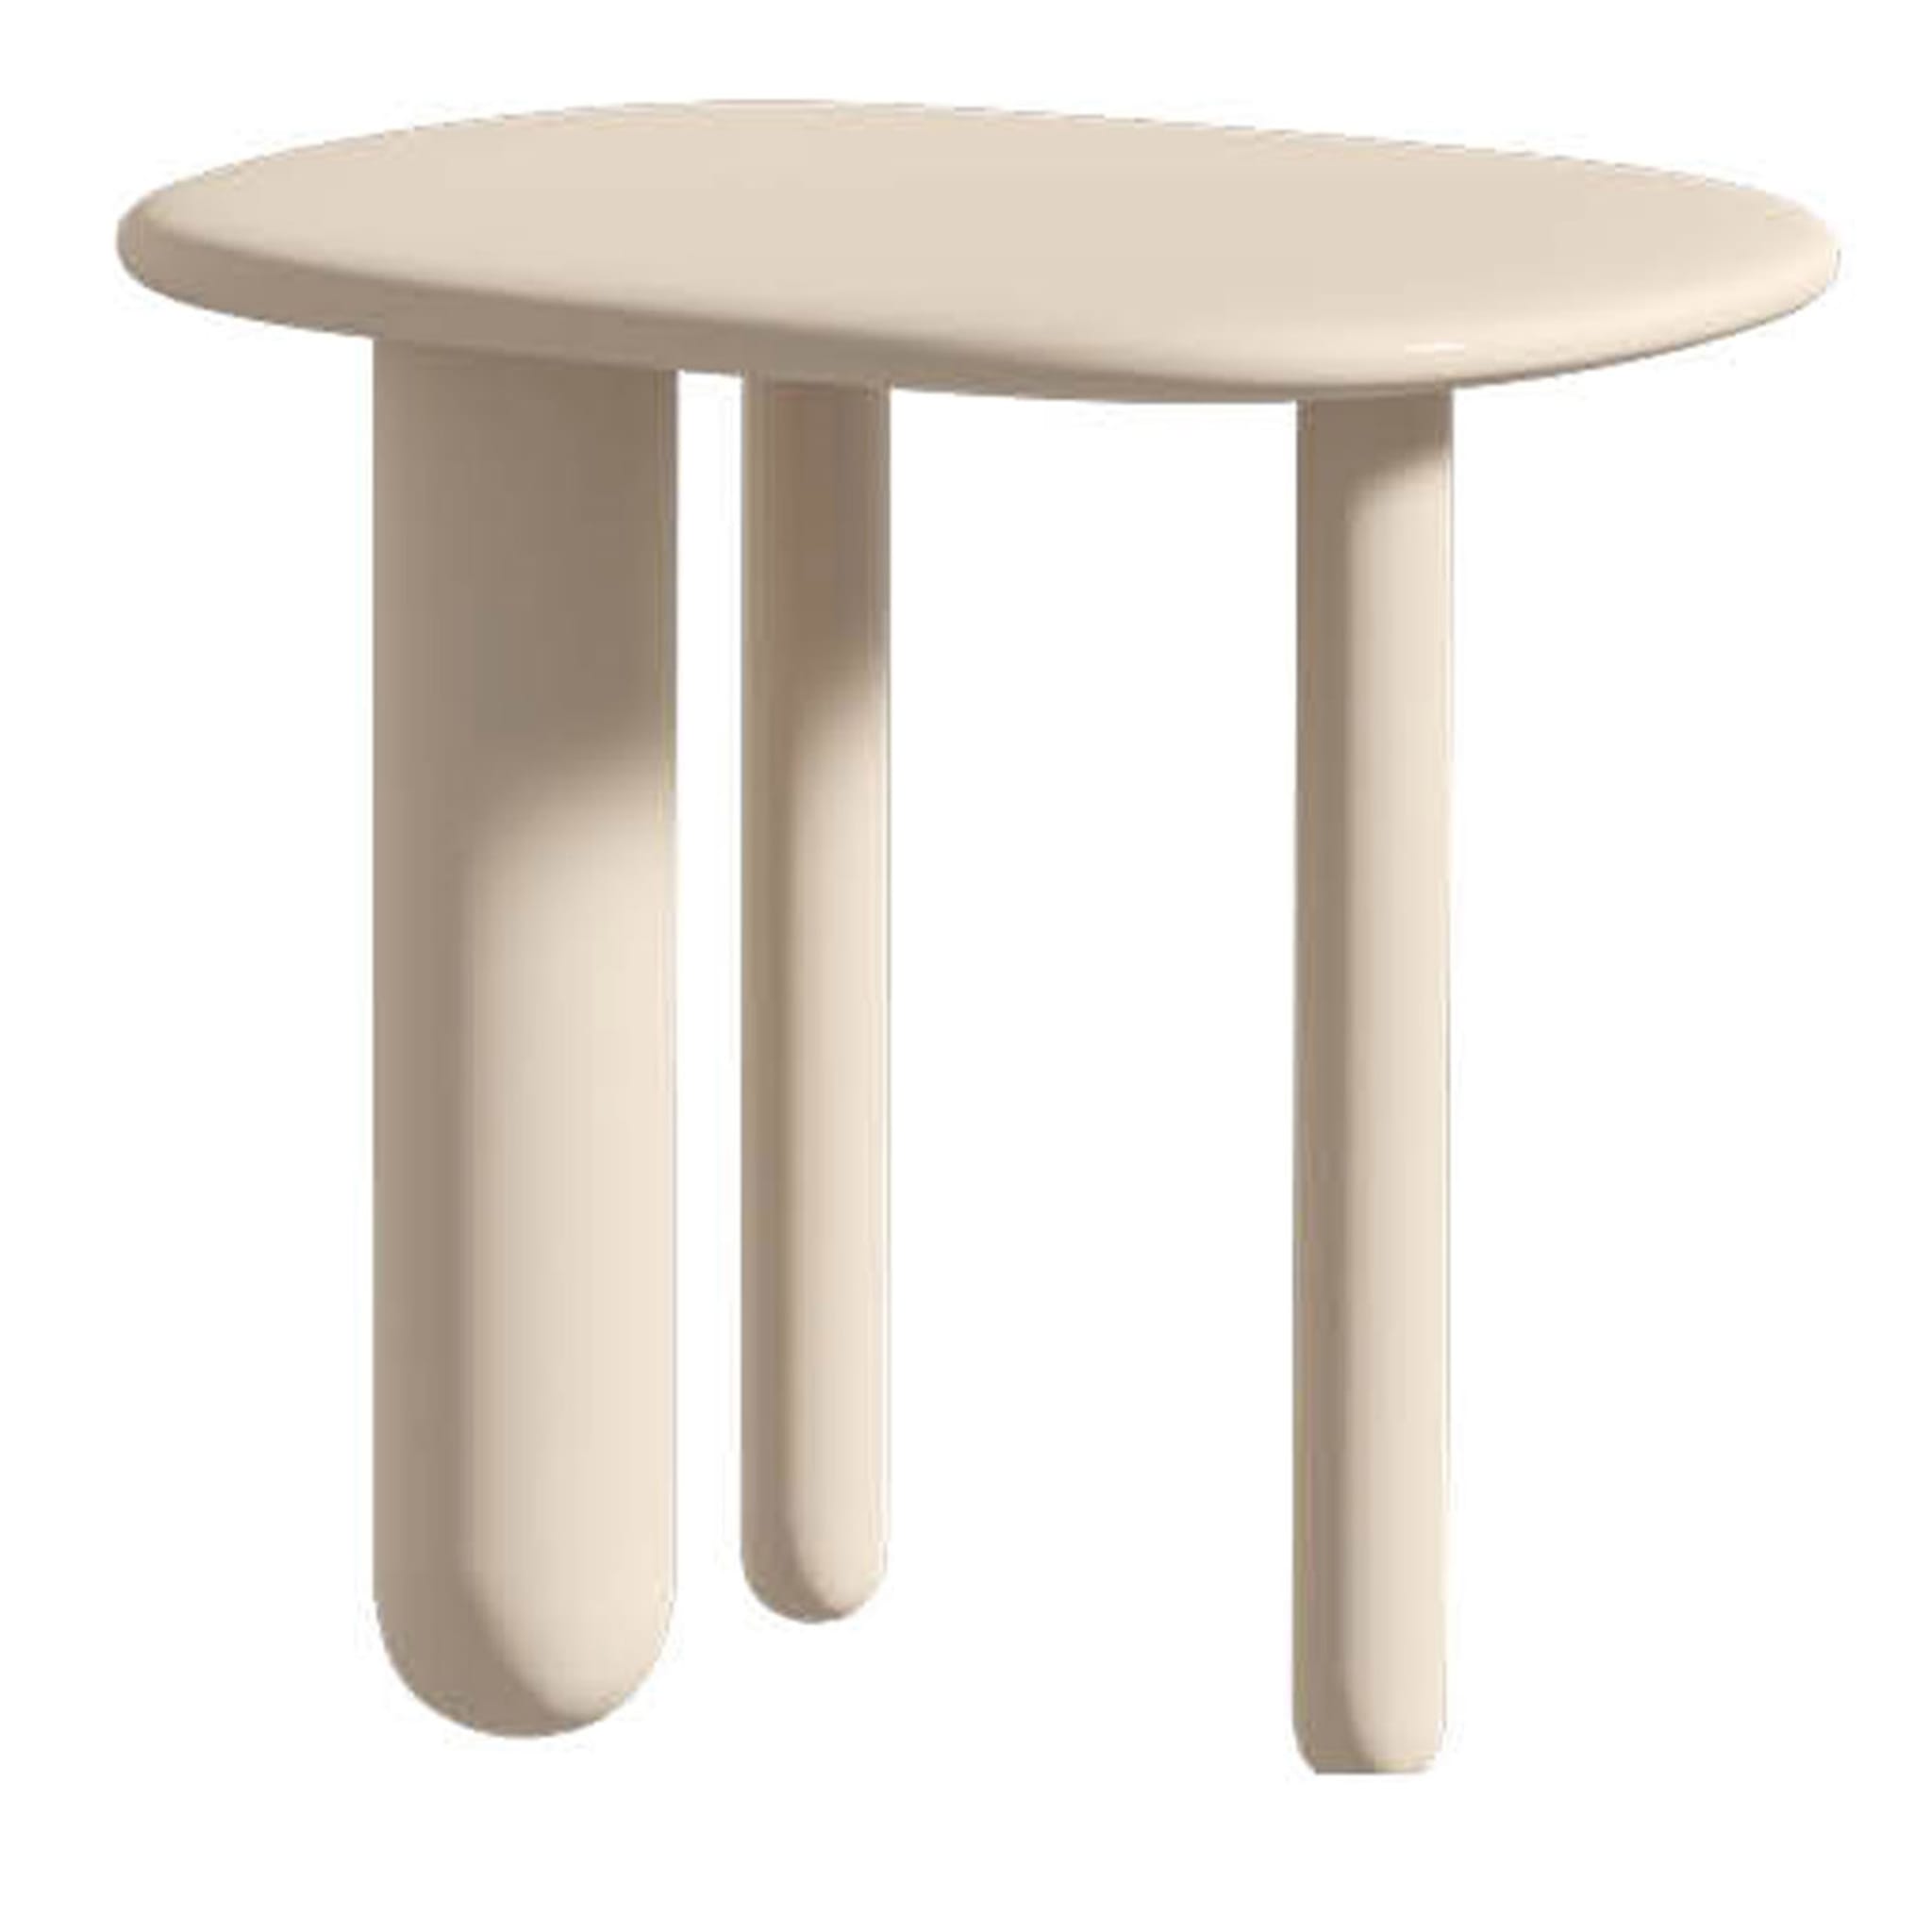 Tottori Ivory Accent Table by Kateryna Sokolova - Main view